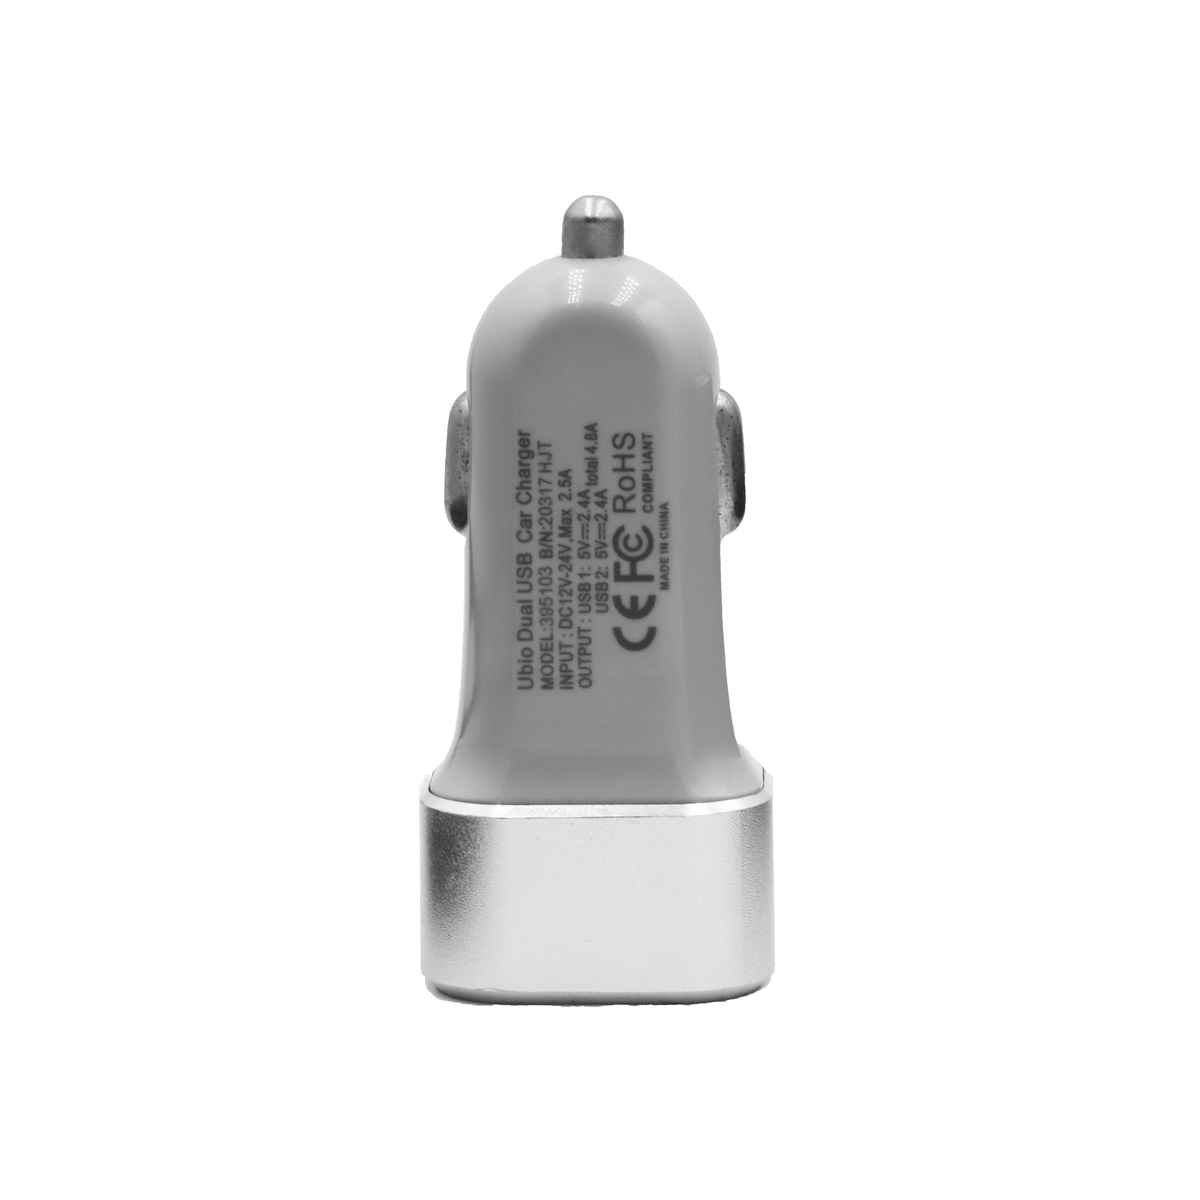 1. LM-395103 Dual USB Car Charger Bulk Purchase and Corporate purchase from China Union Power -Description-